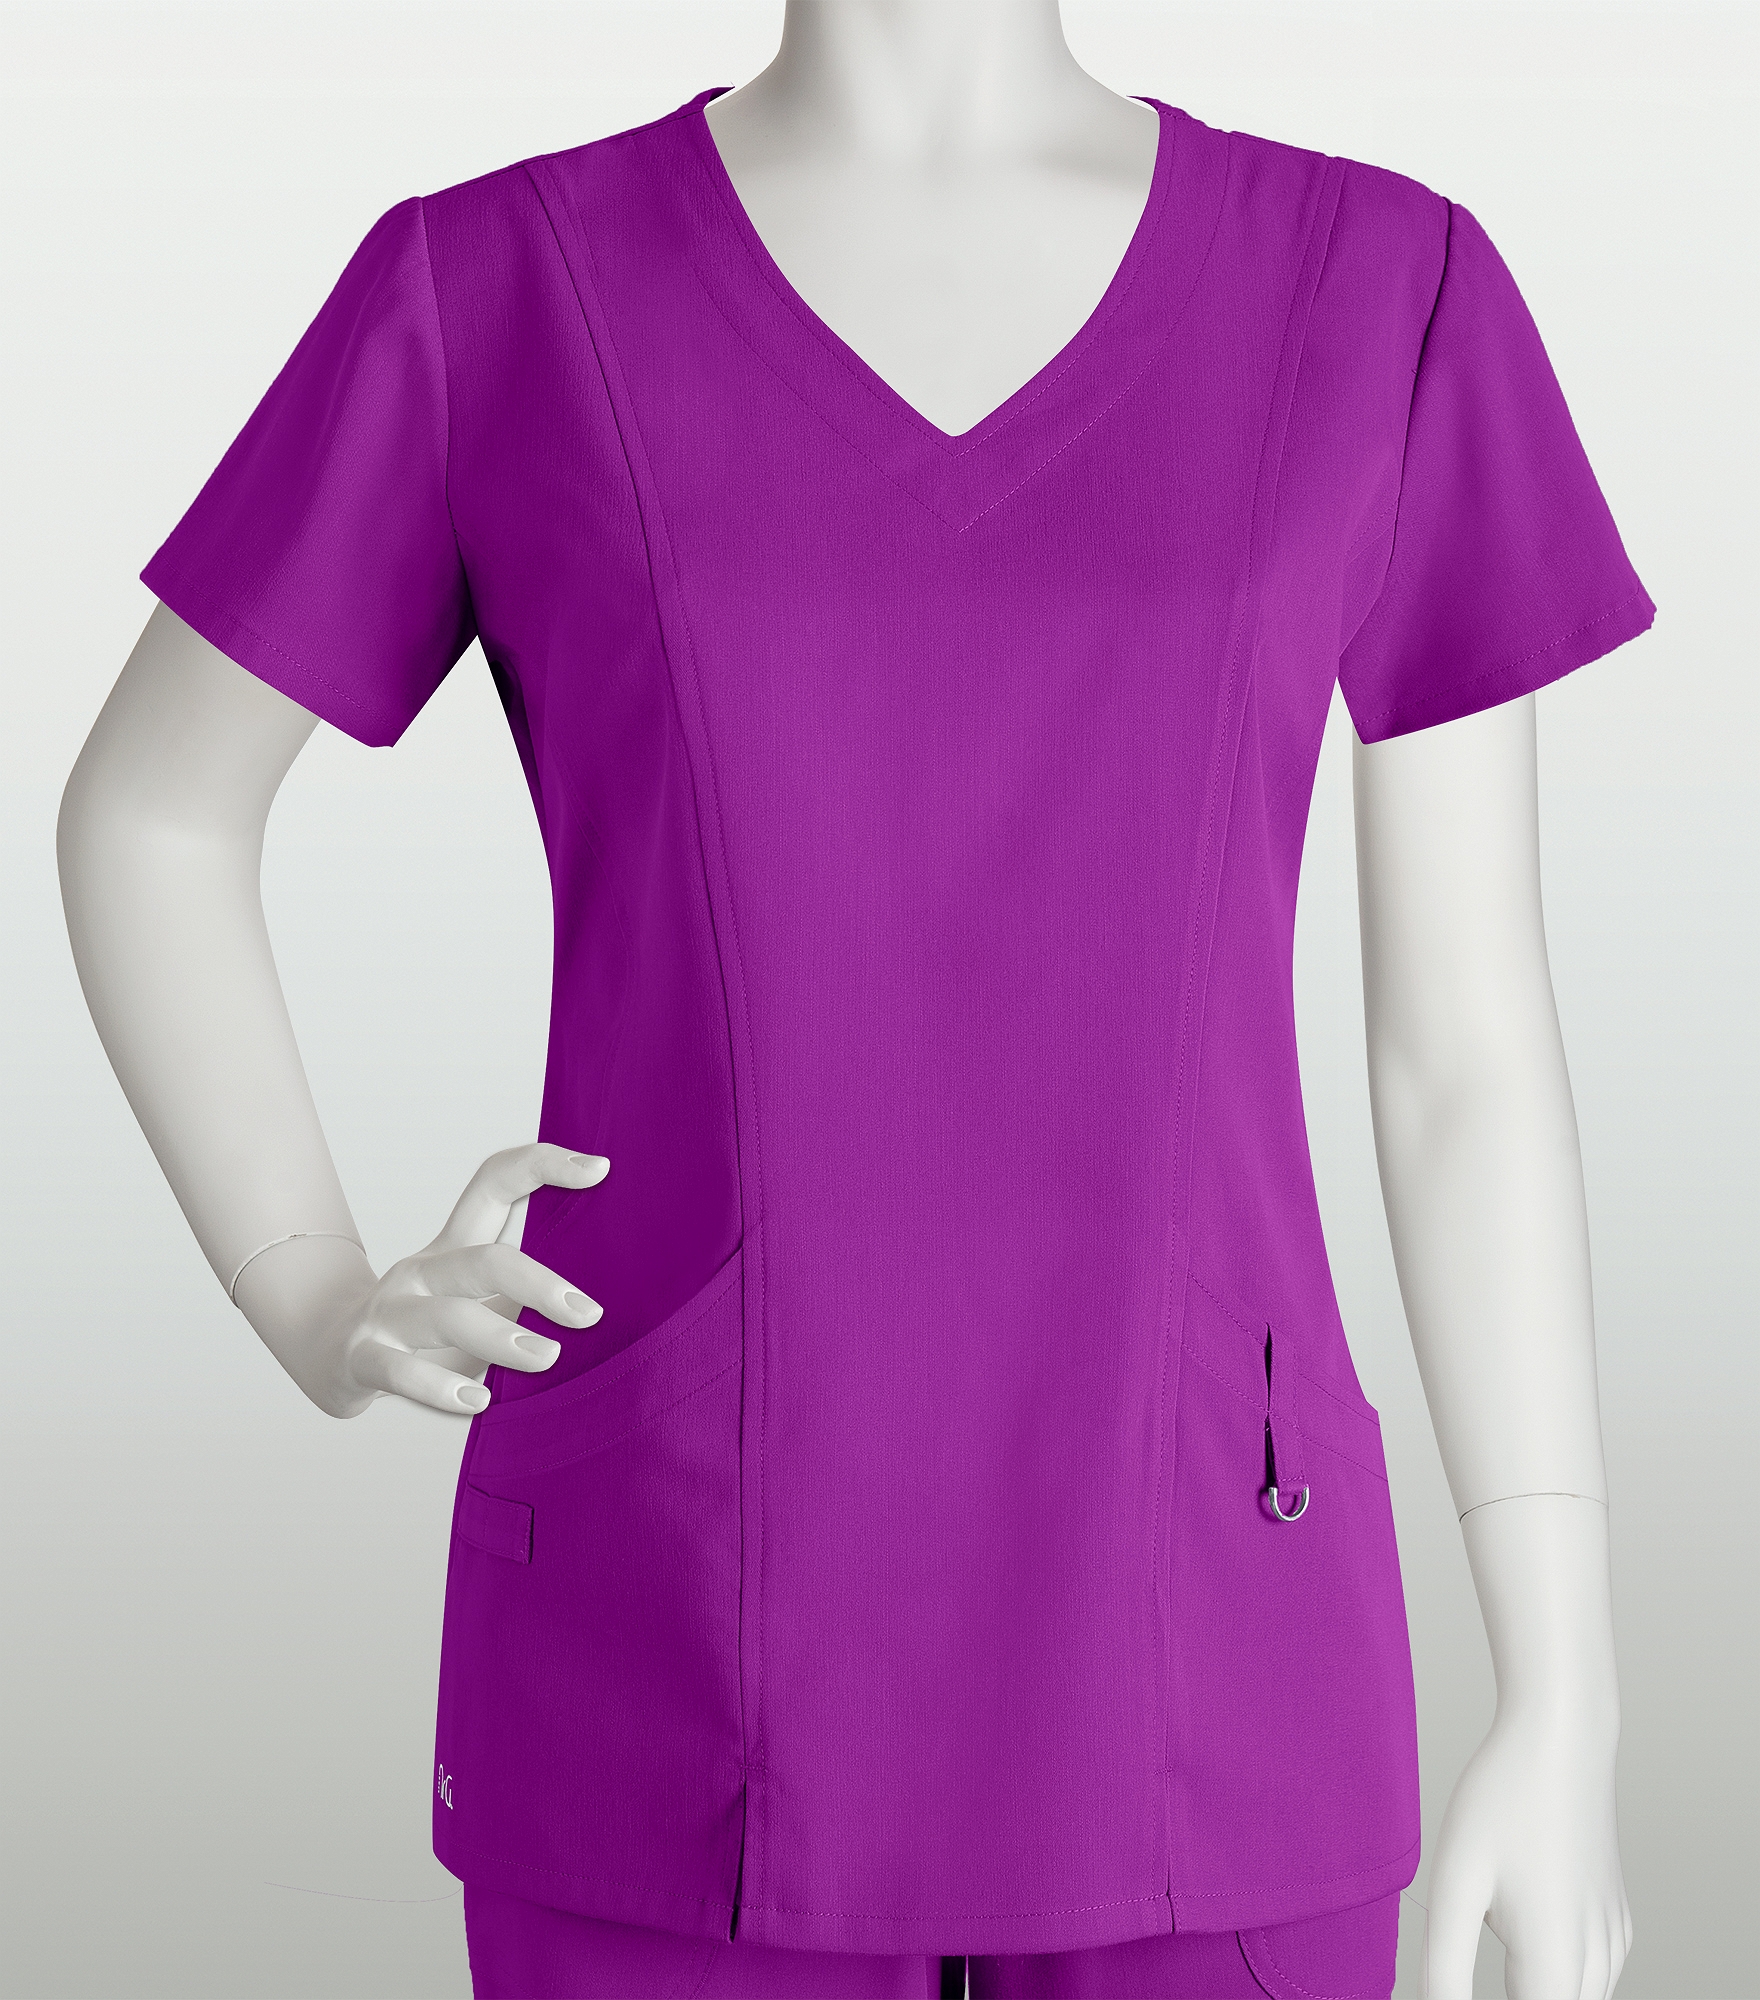 NRG by Barco 2 Pocket V-neck Top With Panels 3116